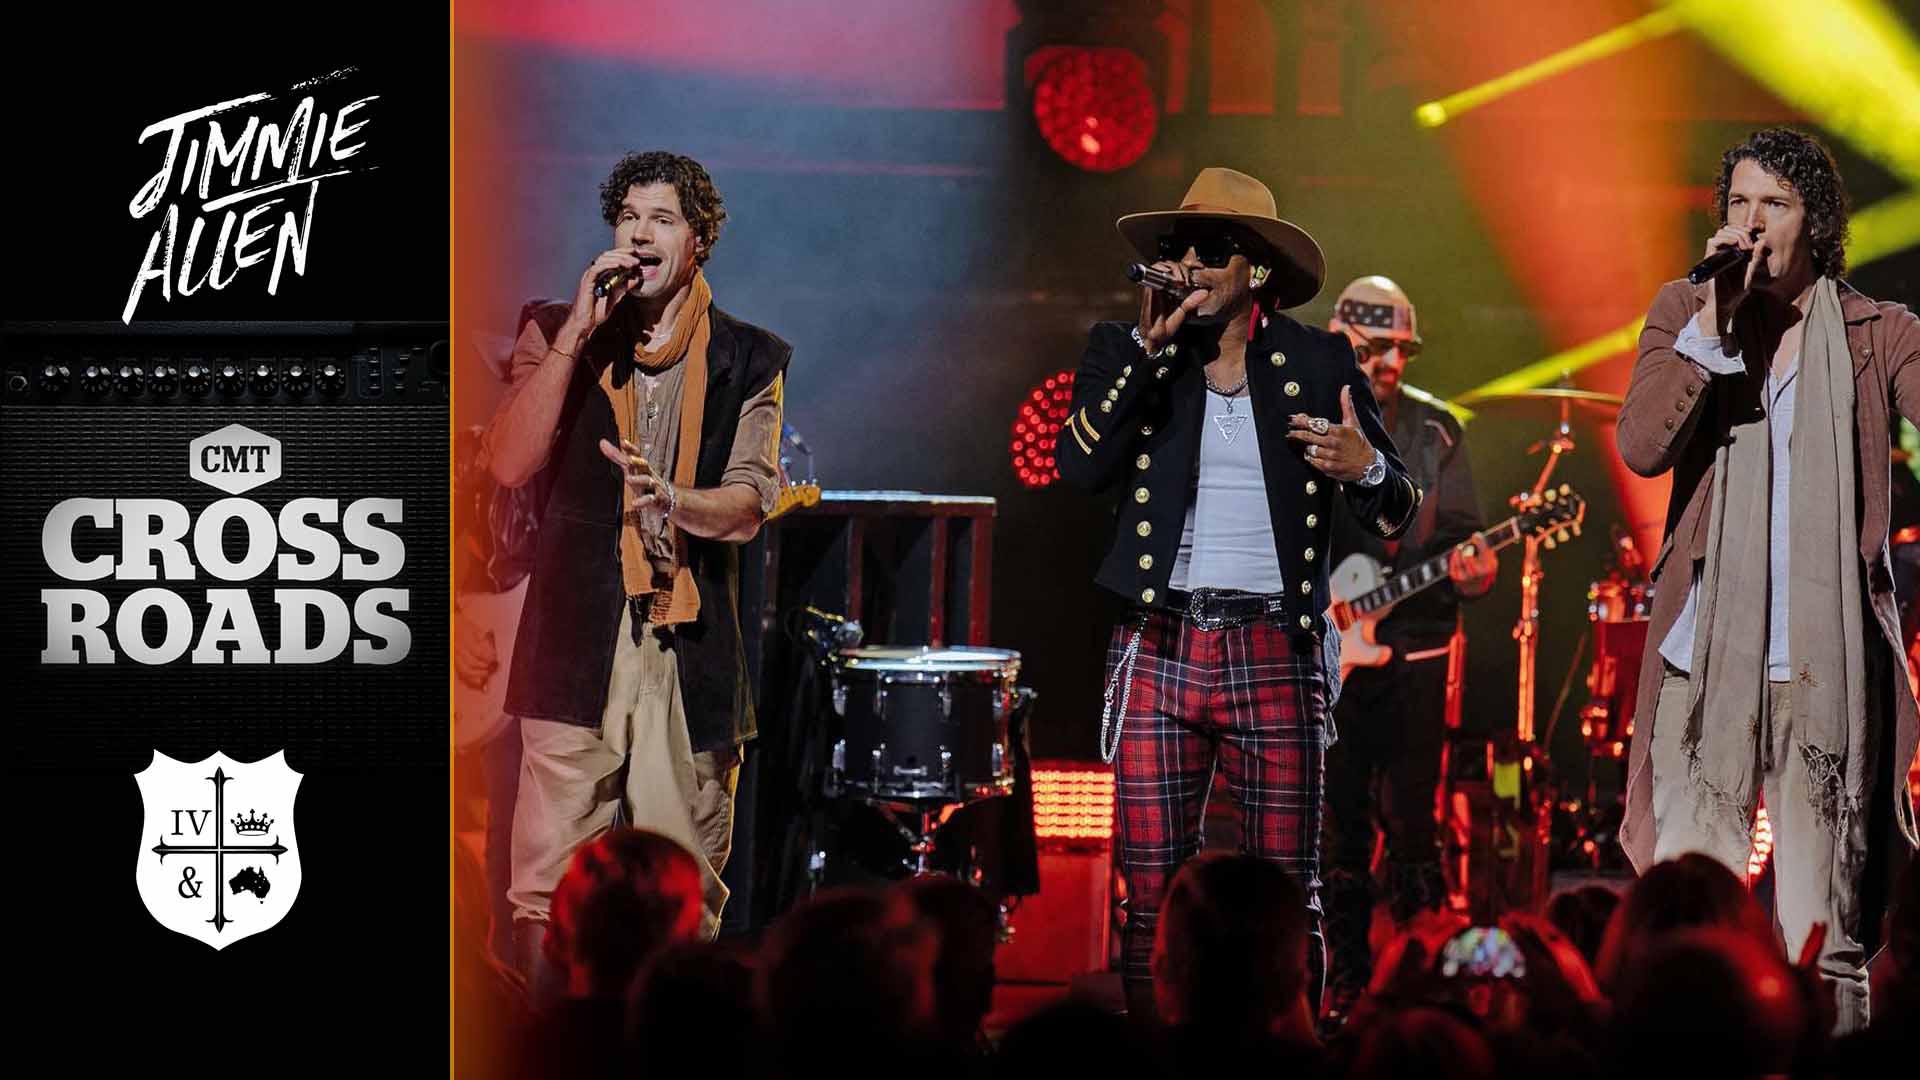 FOR KING + COUNTRY and Country Artist Jimmie Allen Perform Together at the CMT Crossroads